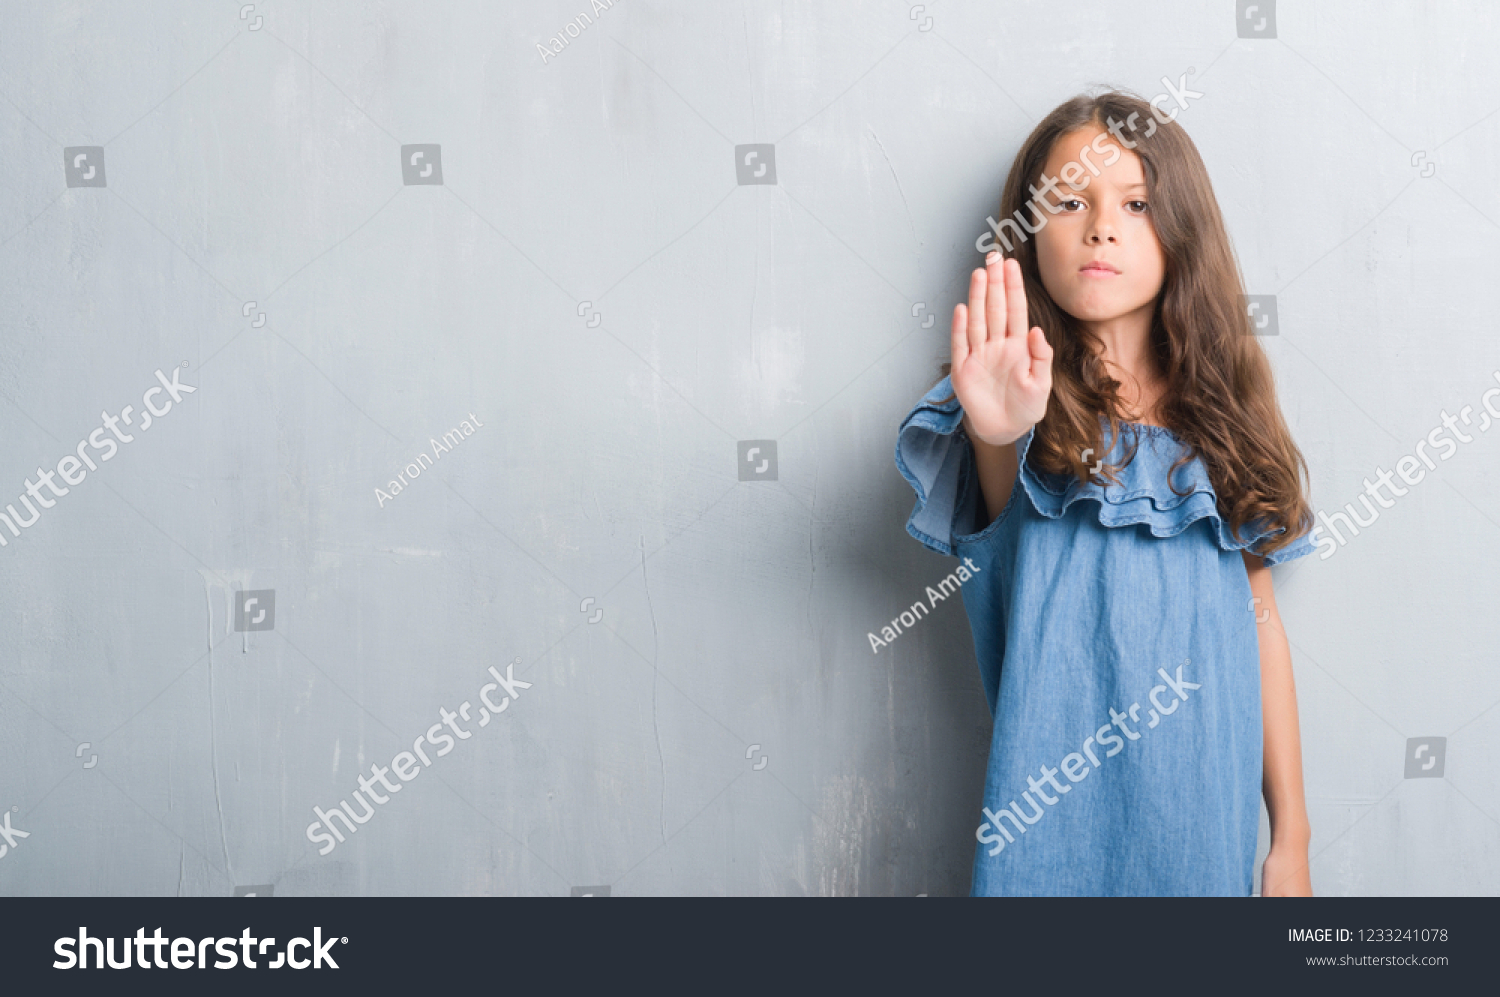 Young hispanic kid over grunge grey wall doing stop sing with palm of the hand. Warning expression with negative and serious gesture on the face. #1233241078